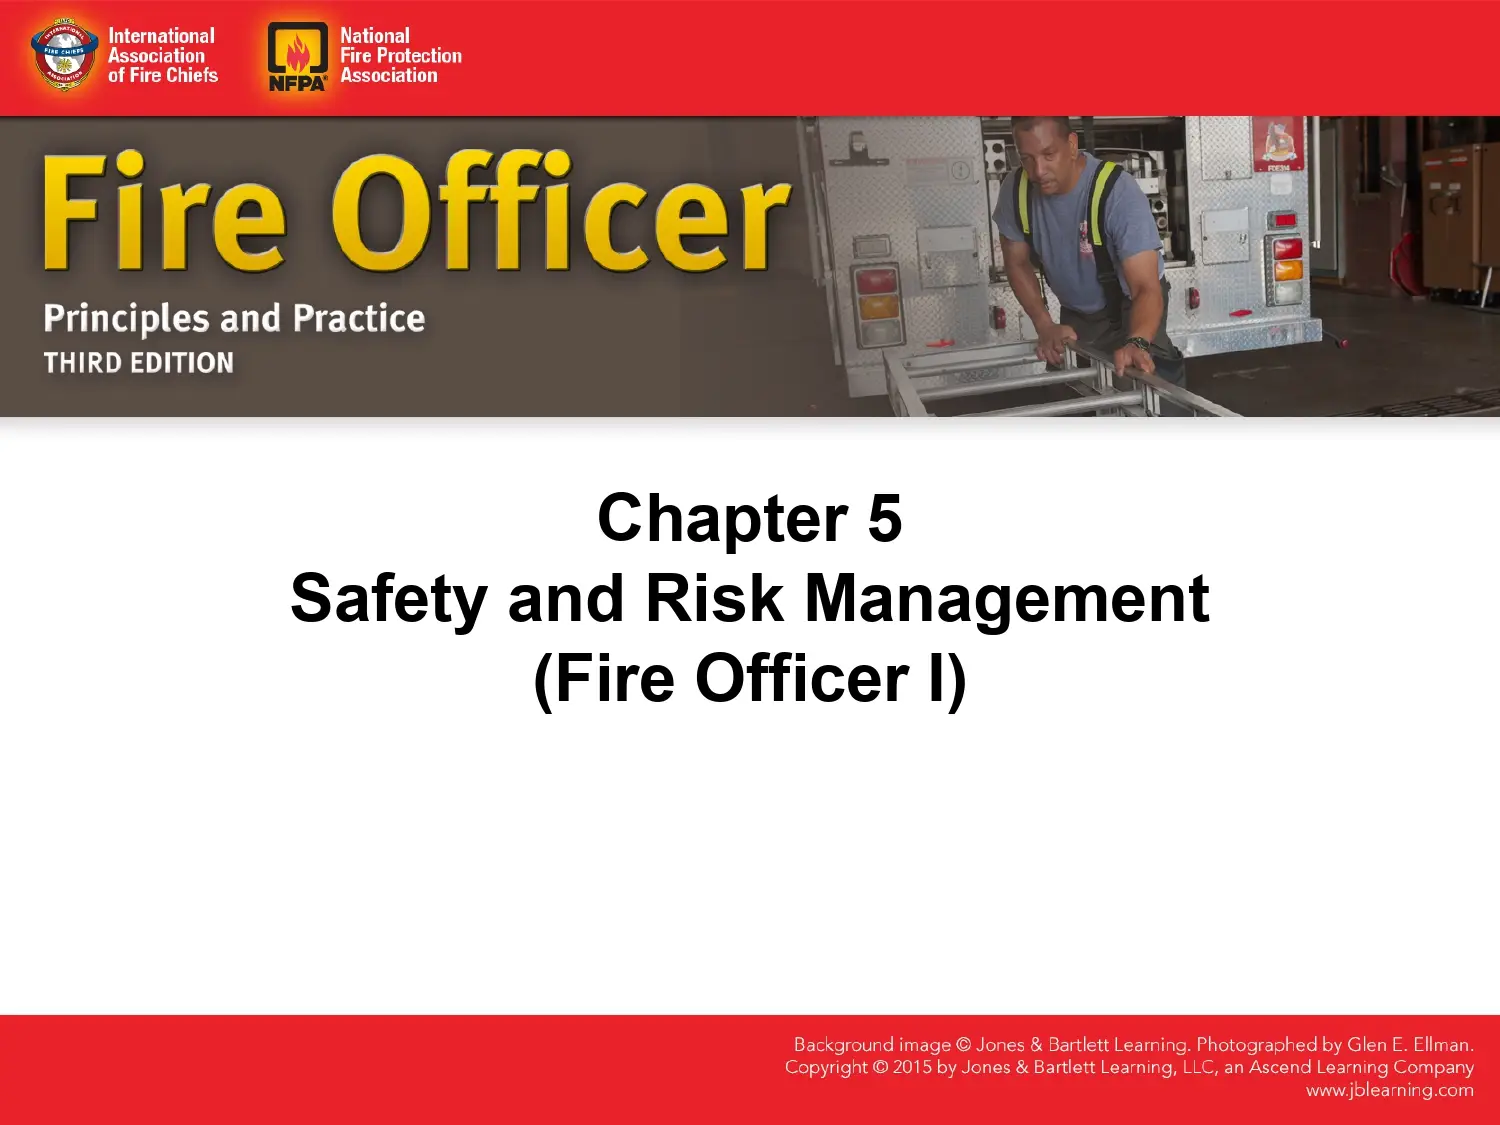 Chapter 5: Safety And Risk Management (Fire Officer I)